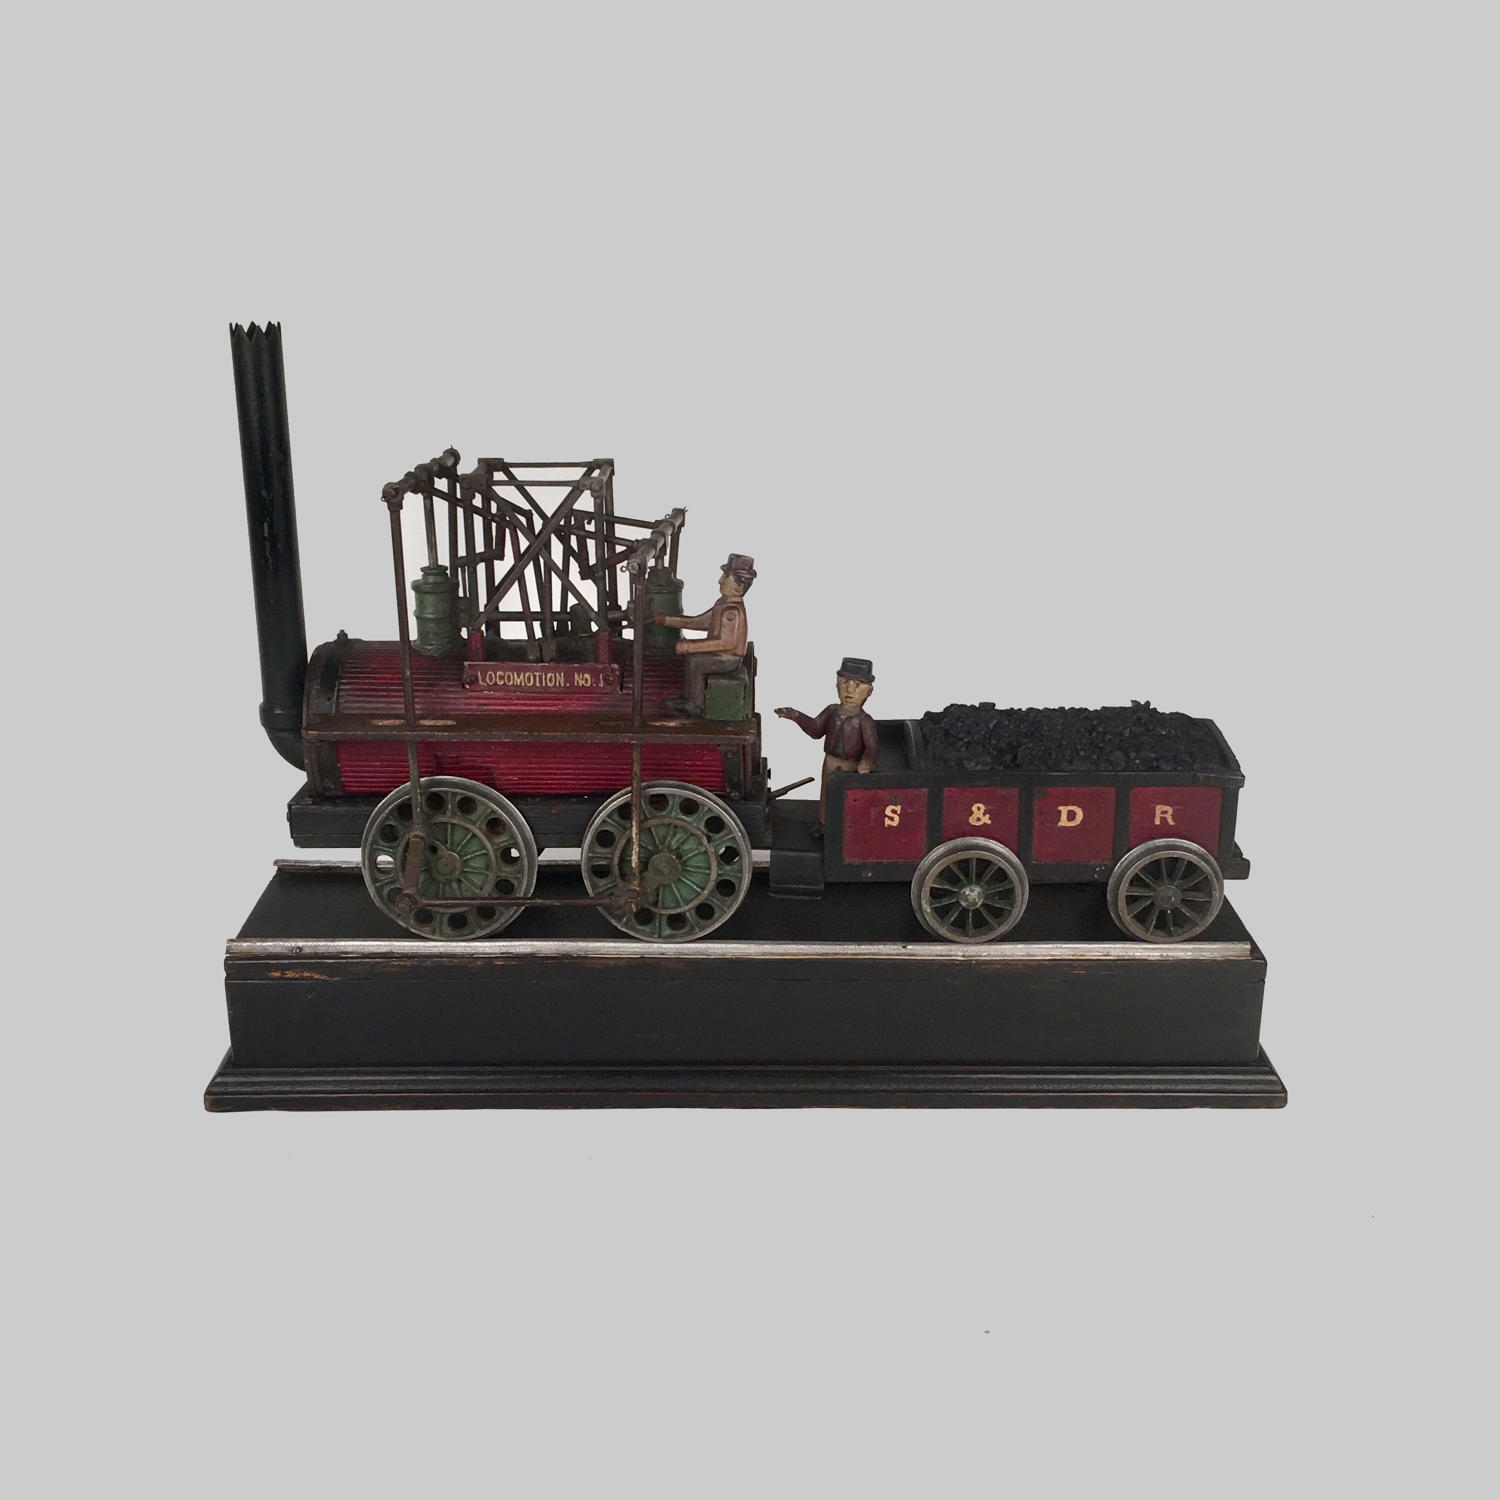 Naive model of a steam engine ‘Locomotion No.1’